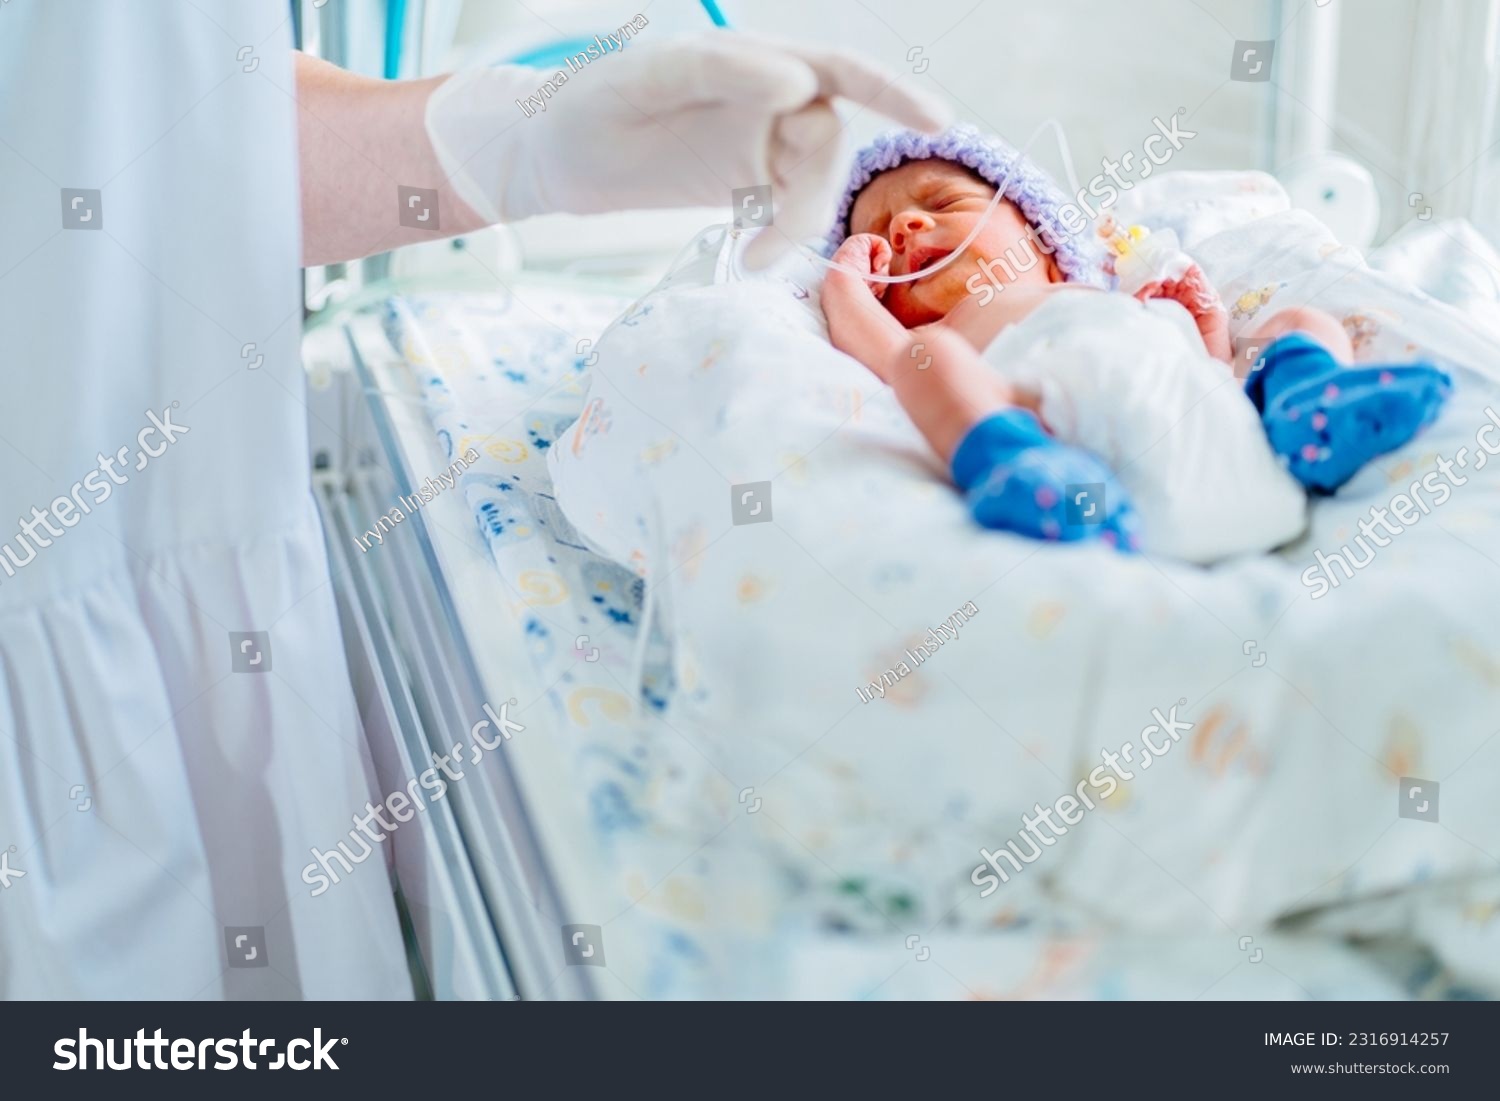 Unrecognizable female nurse wearing uniform touch and care premature born baby in intensive care unit holding cute infant in her hands. #2316914257